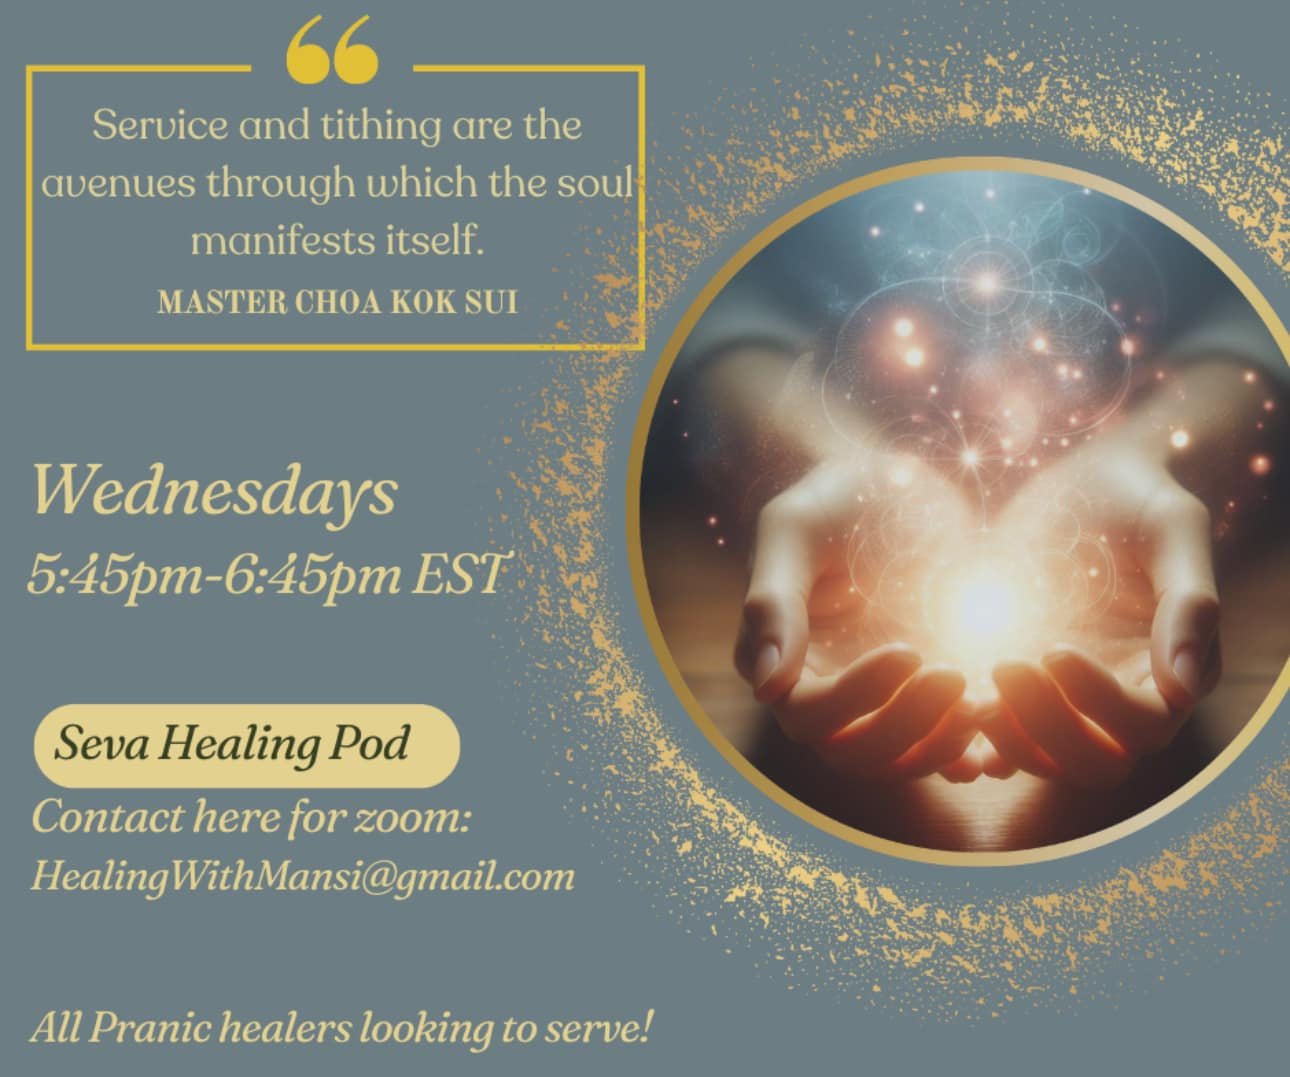 On Wesak Spiritual Festival, I invite all my fellow Pranic Healers who are looking for opportunity to serve,  to join me in &lsquo;Seva&rsquo; Healing pod! We will be meeting on zoom every week! 

&lsquo;Seva&rsquo; means selfless service and is also